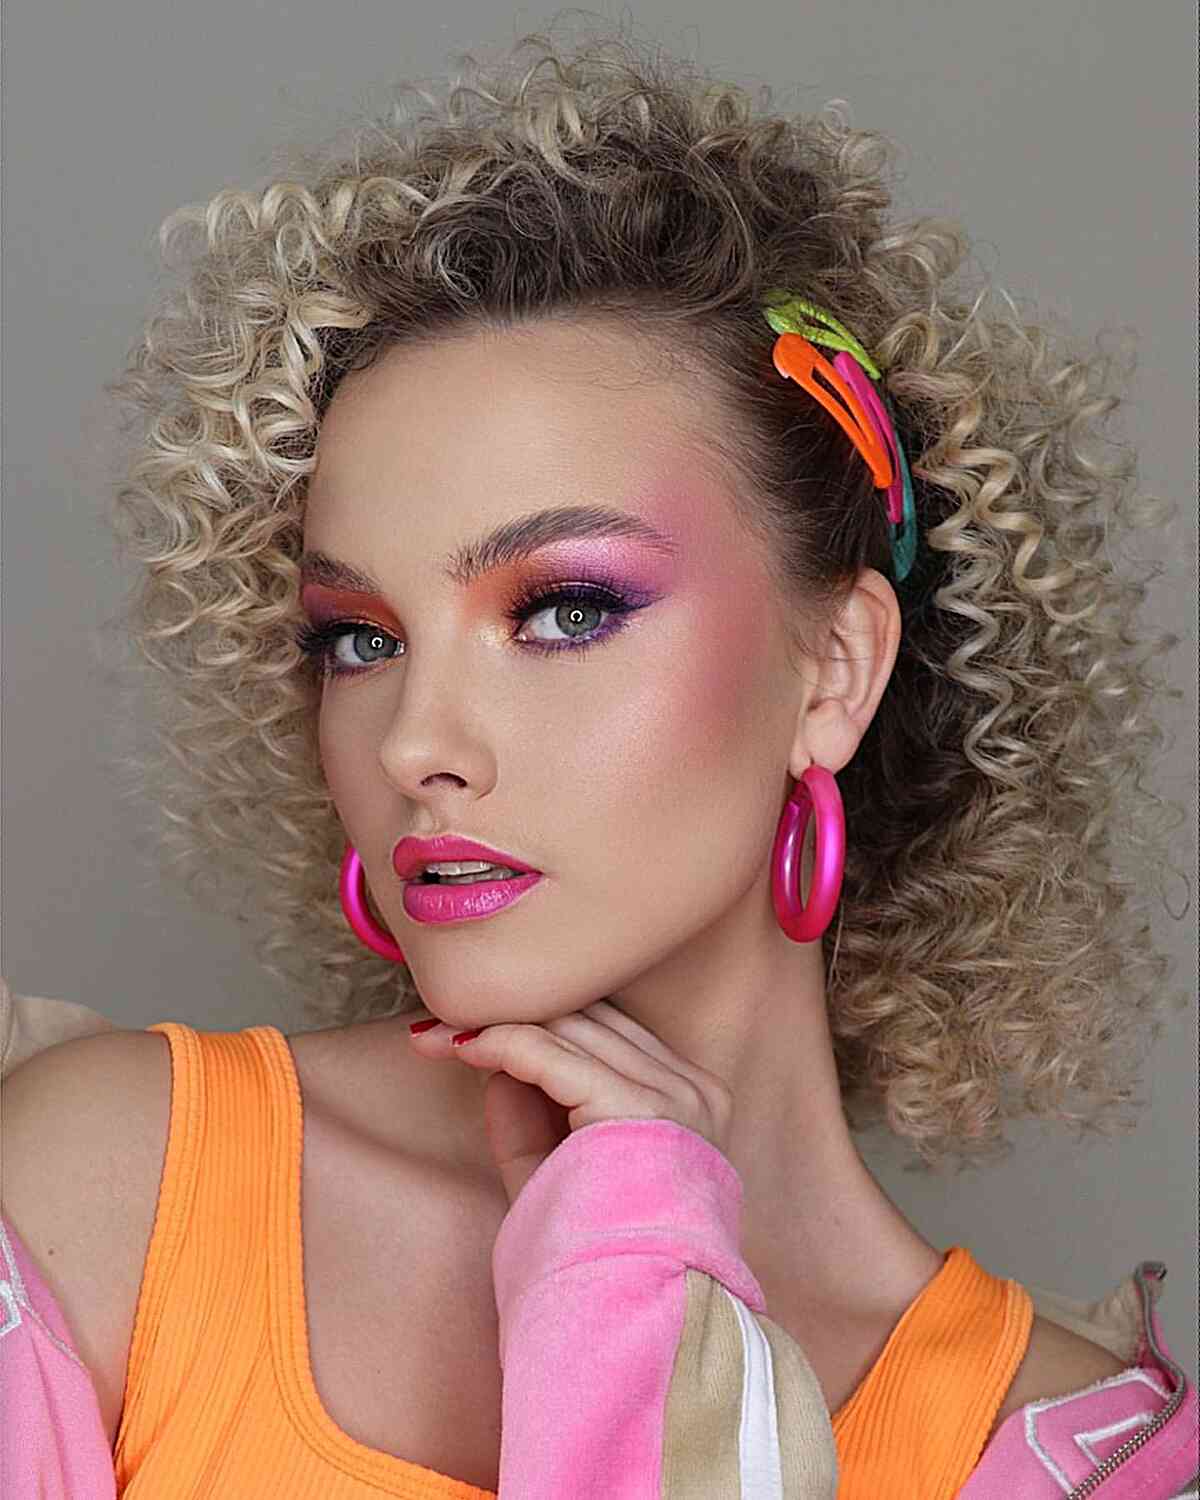 80s Medium Side-Swept Retro Curly Hair with Colorful Clips